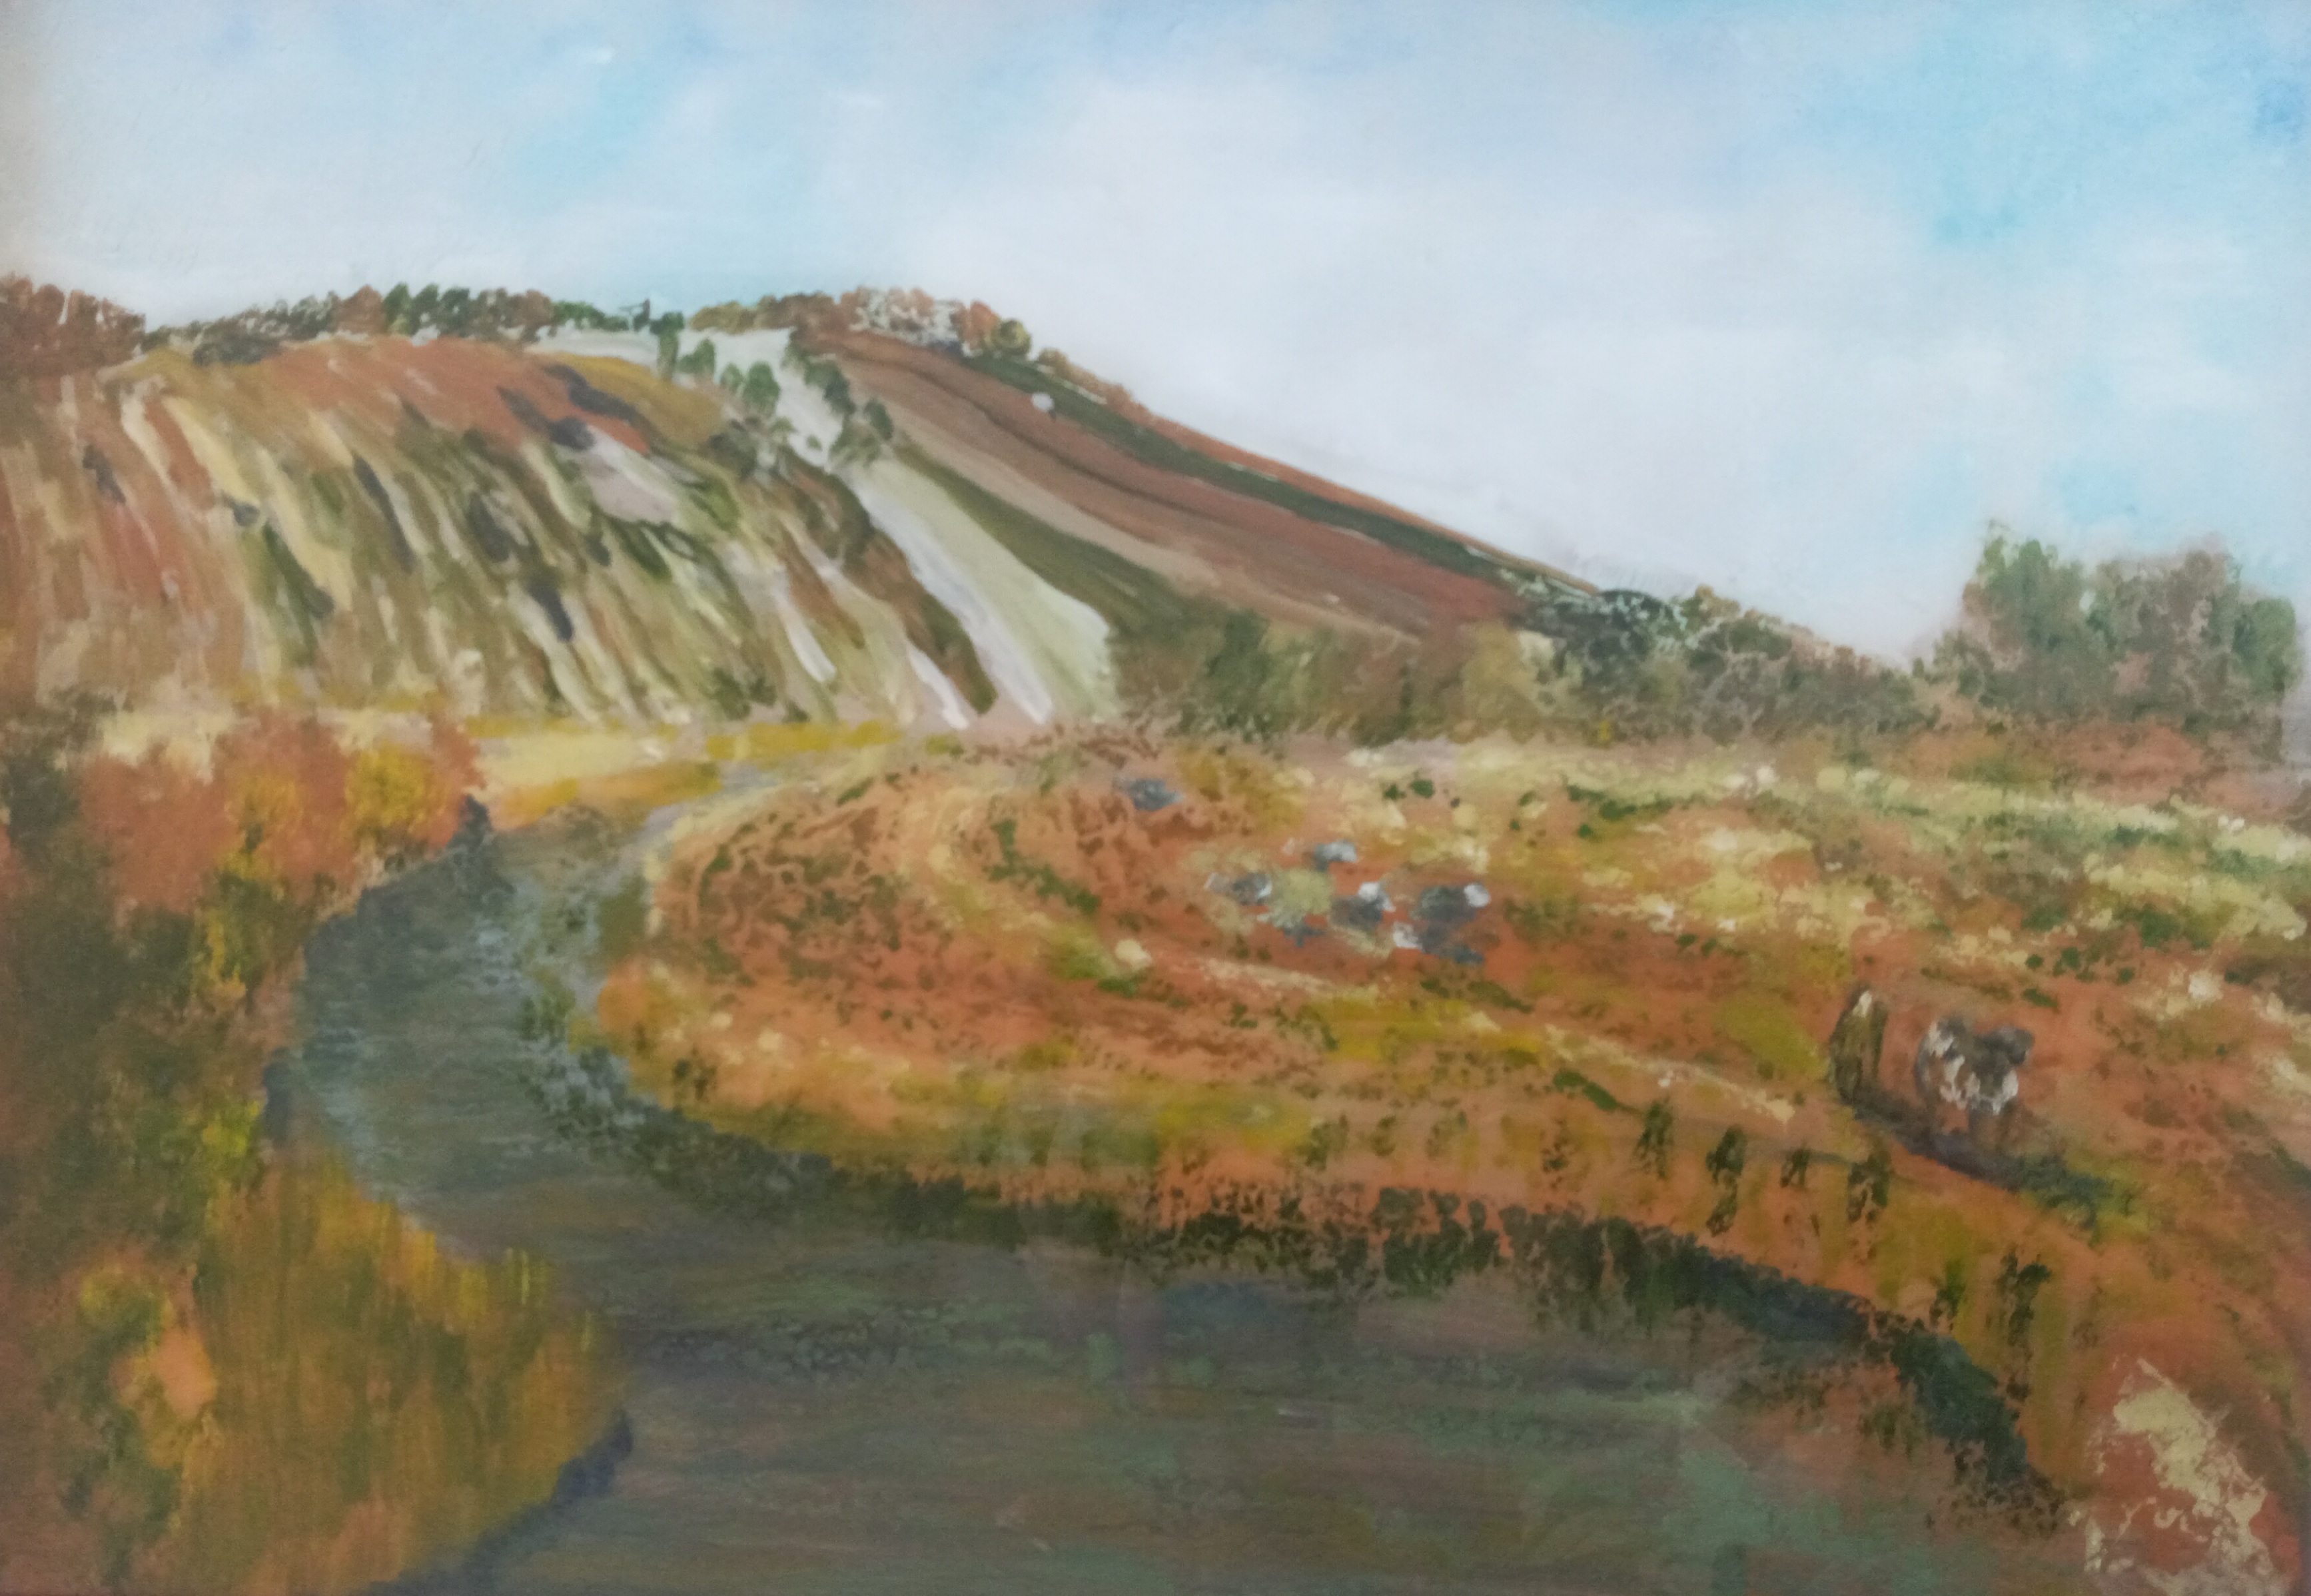 Oil paint on glass. A view of a river flowing from a mountain.